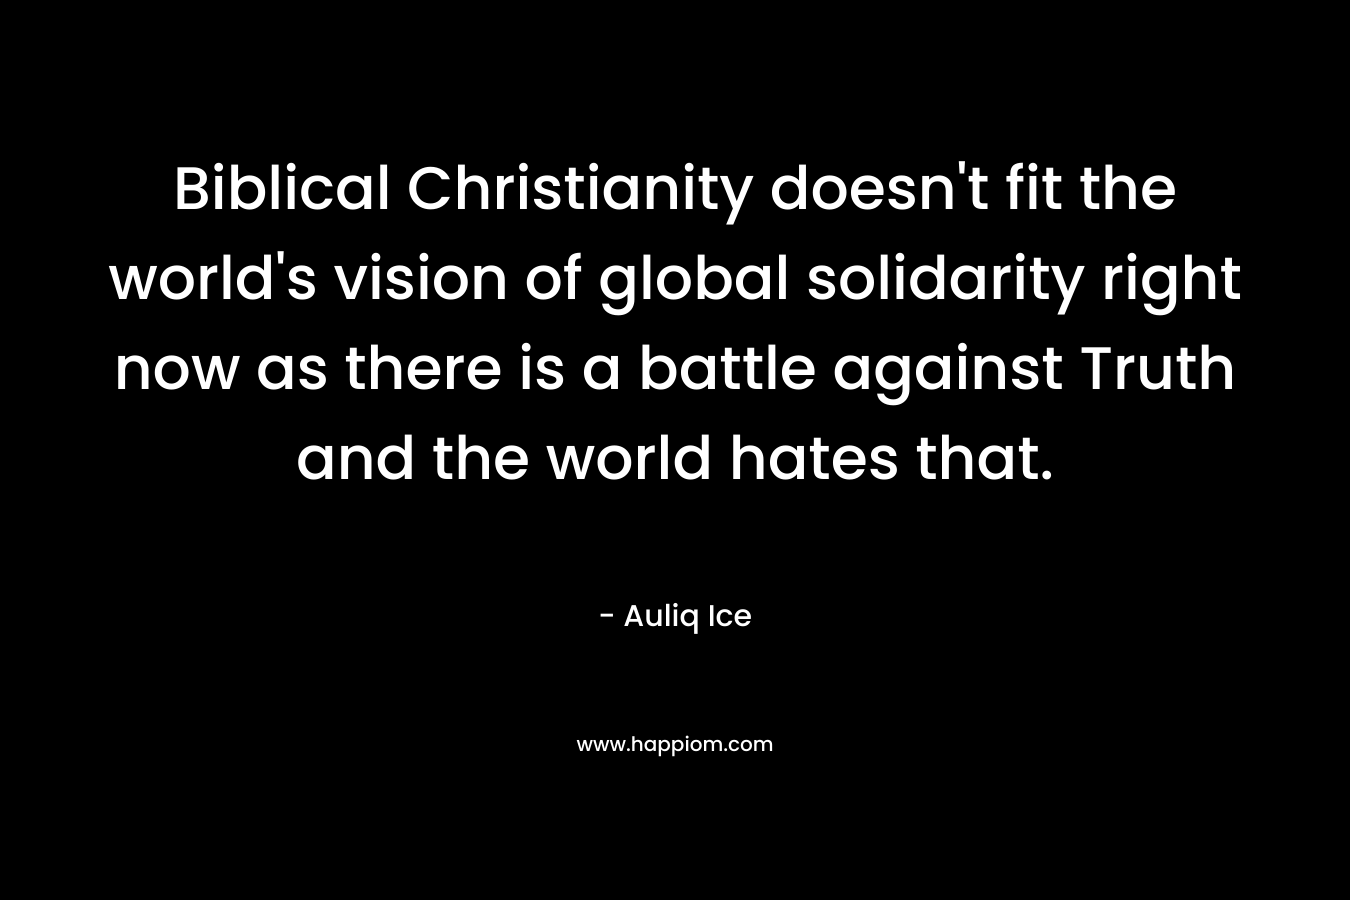 Biblical Christianity doesn’t fit the world’s vision of global solidarity right now as there is a battle against Truth and the world hates that. – Auliq Ice